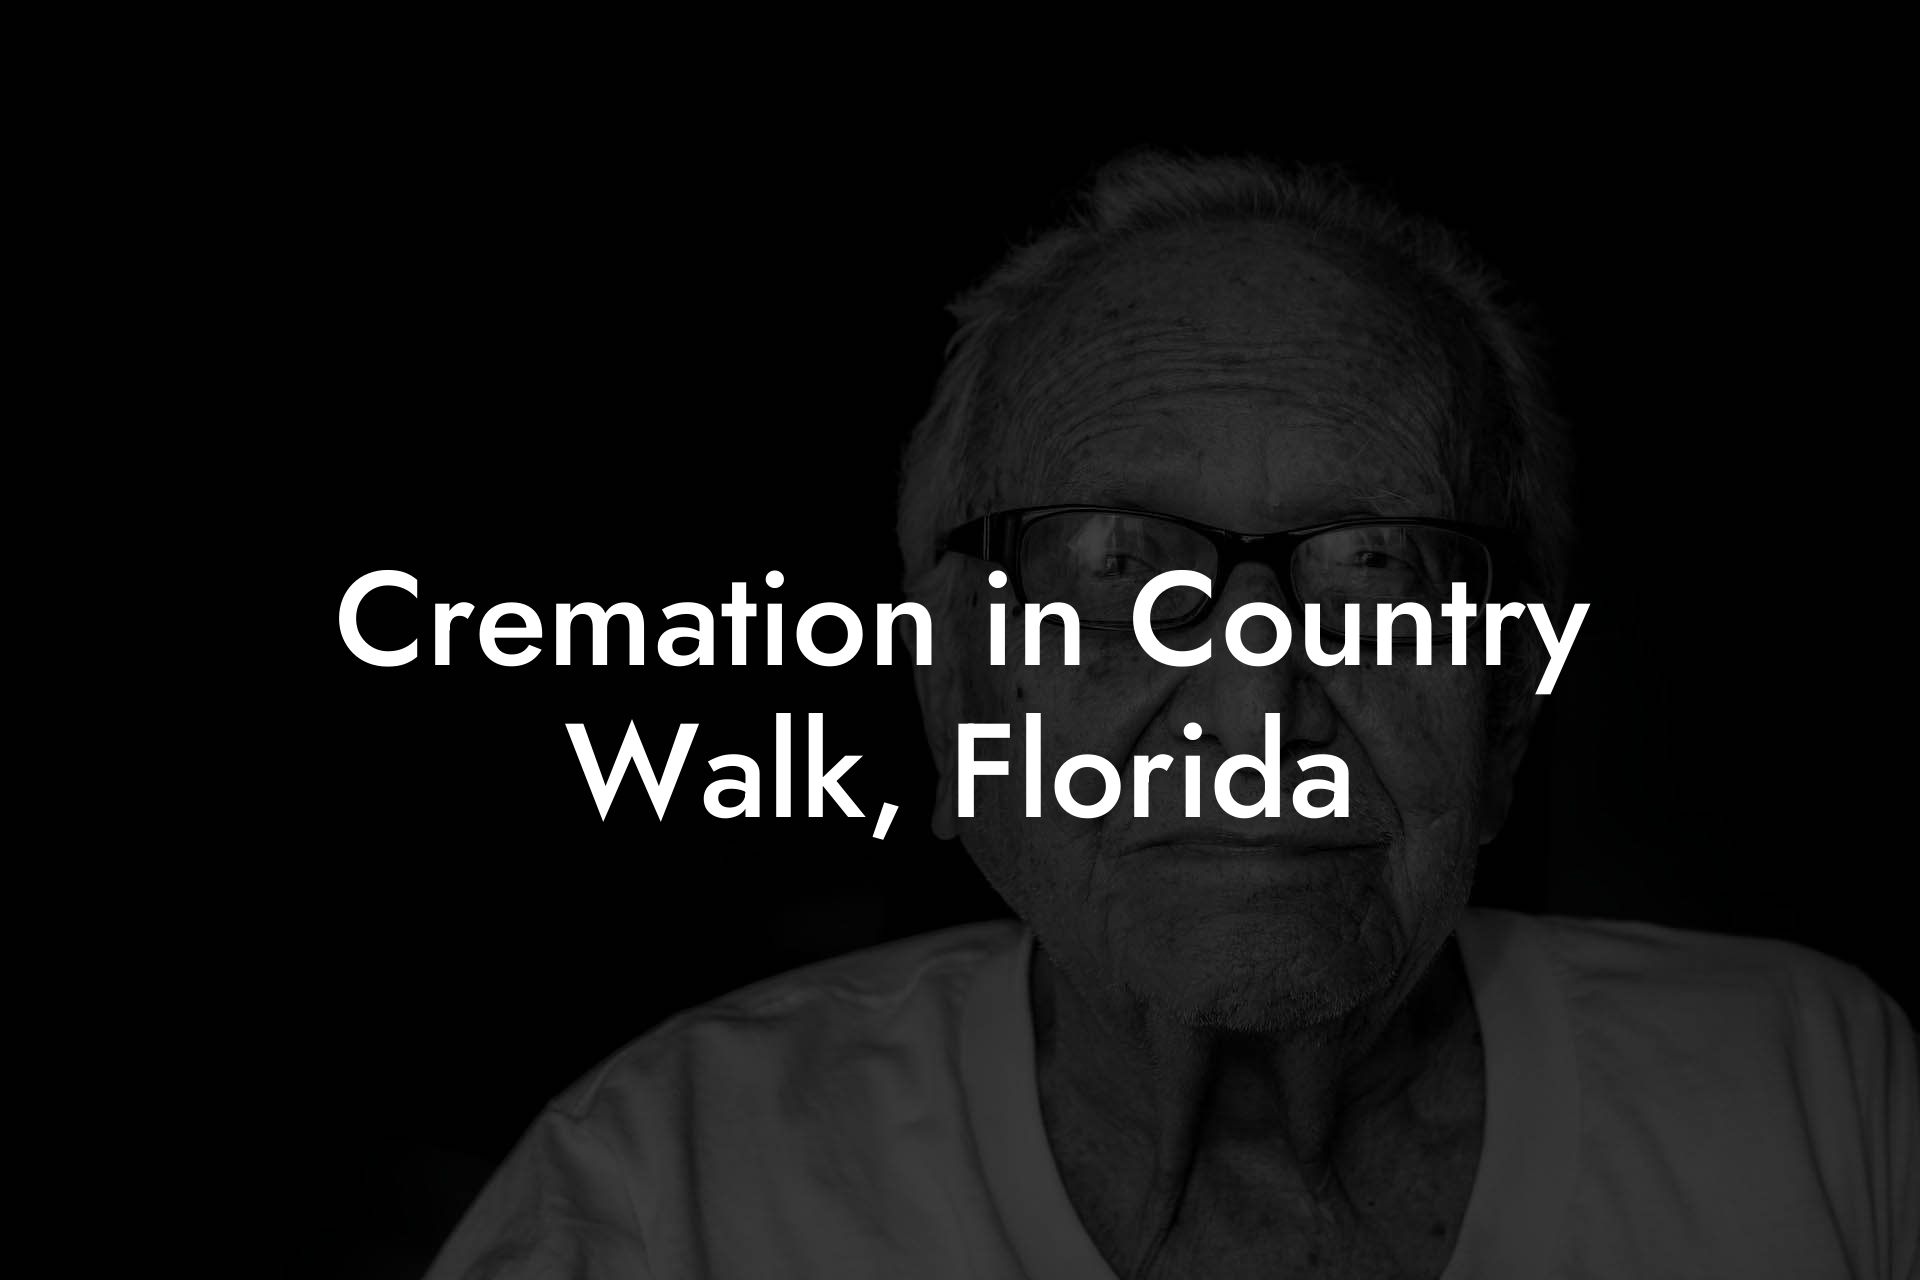 Cremation in Country Walk, Florida